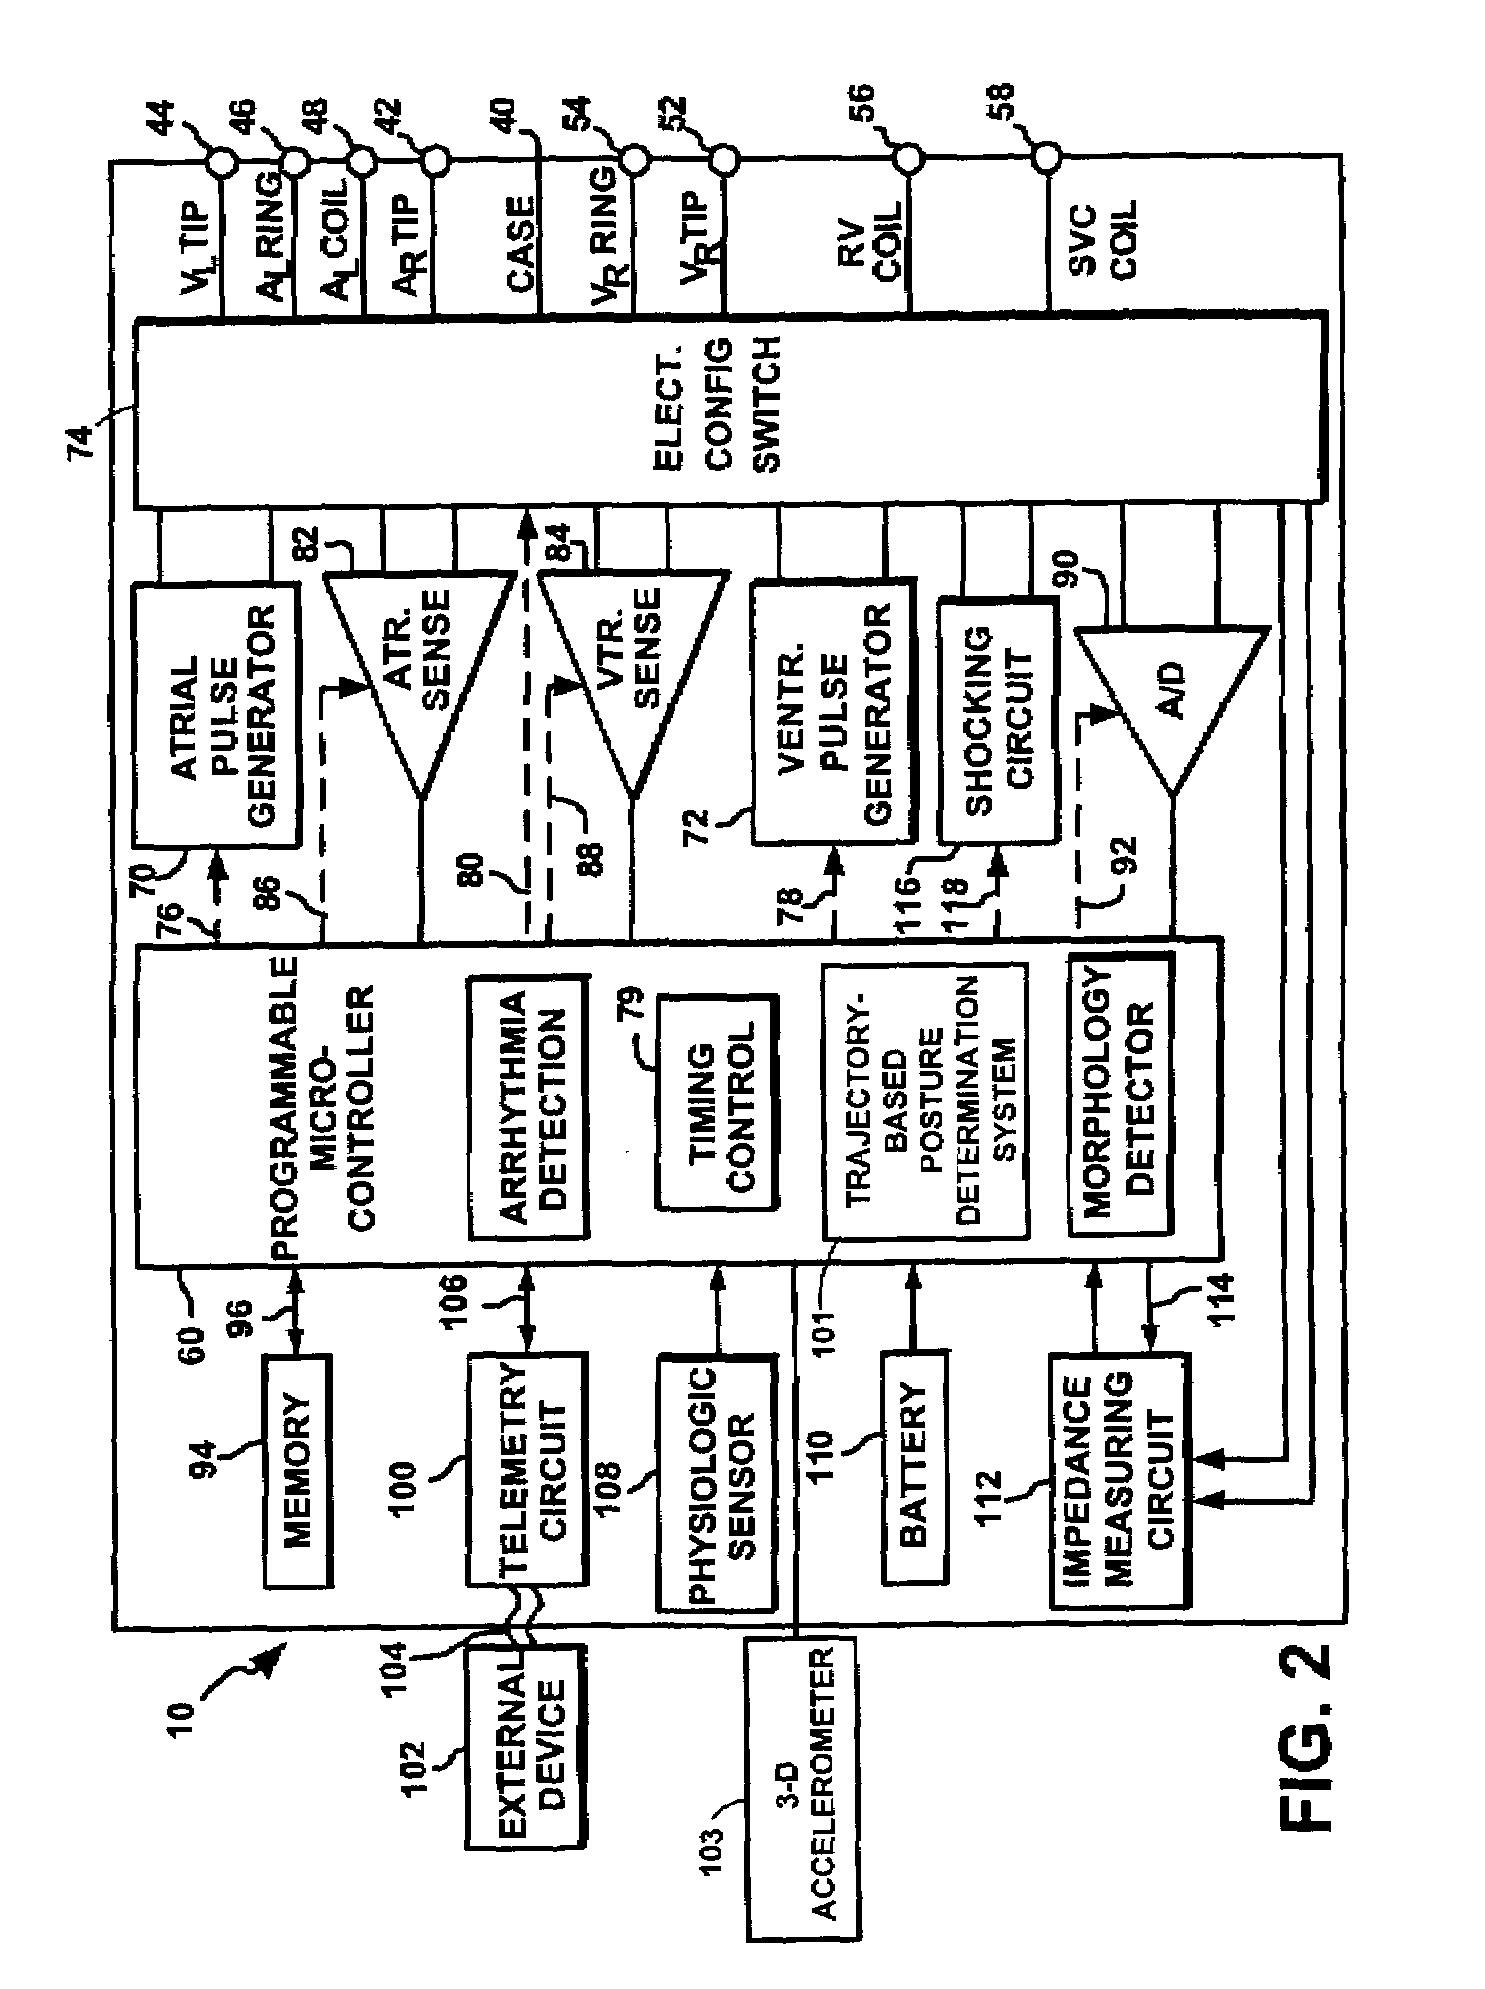 System and method for determining patient posture based on 3-D trajectory using an implantable medical device